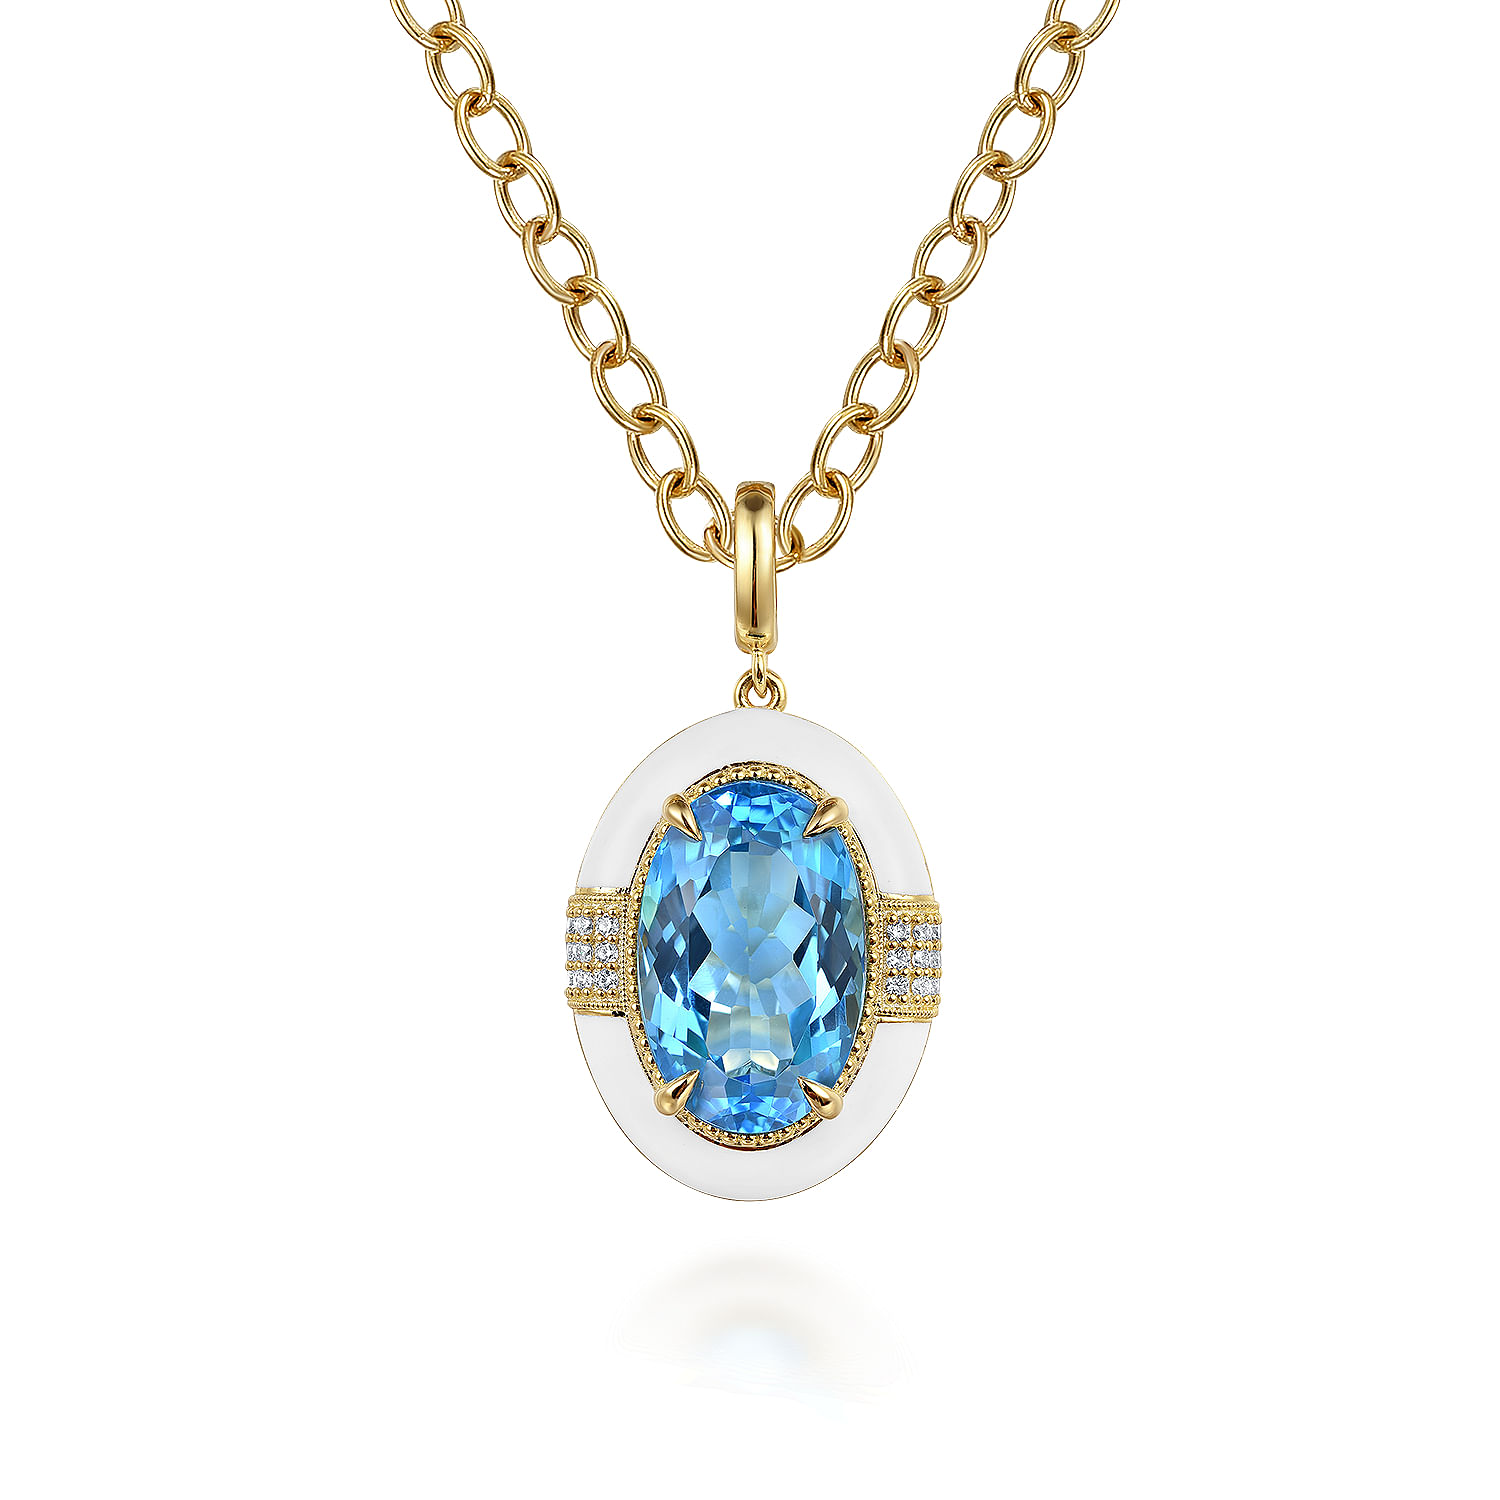 14K Yellow Gold Diamond and Blue Topaz Oval Shape Necklace With Flower Pattern J-Back and White Enamel